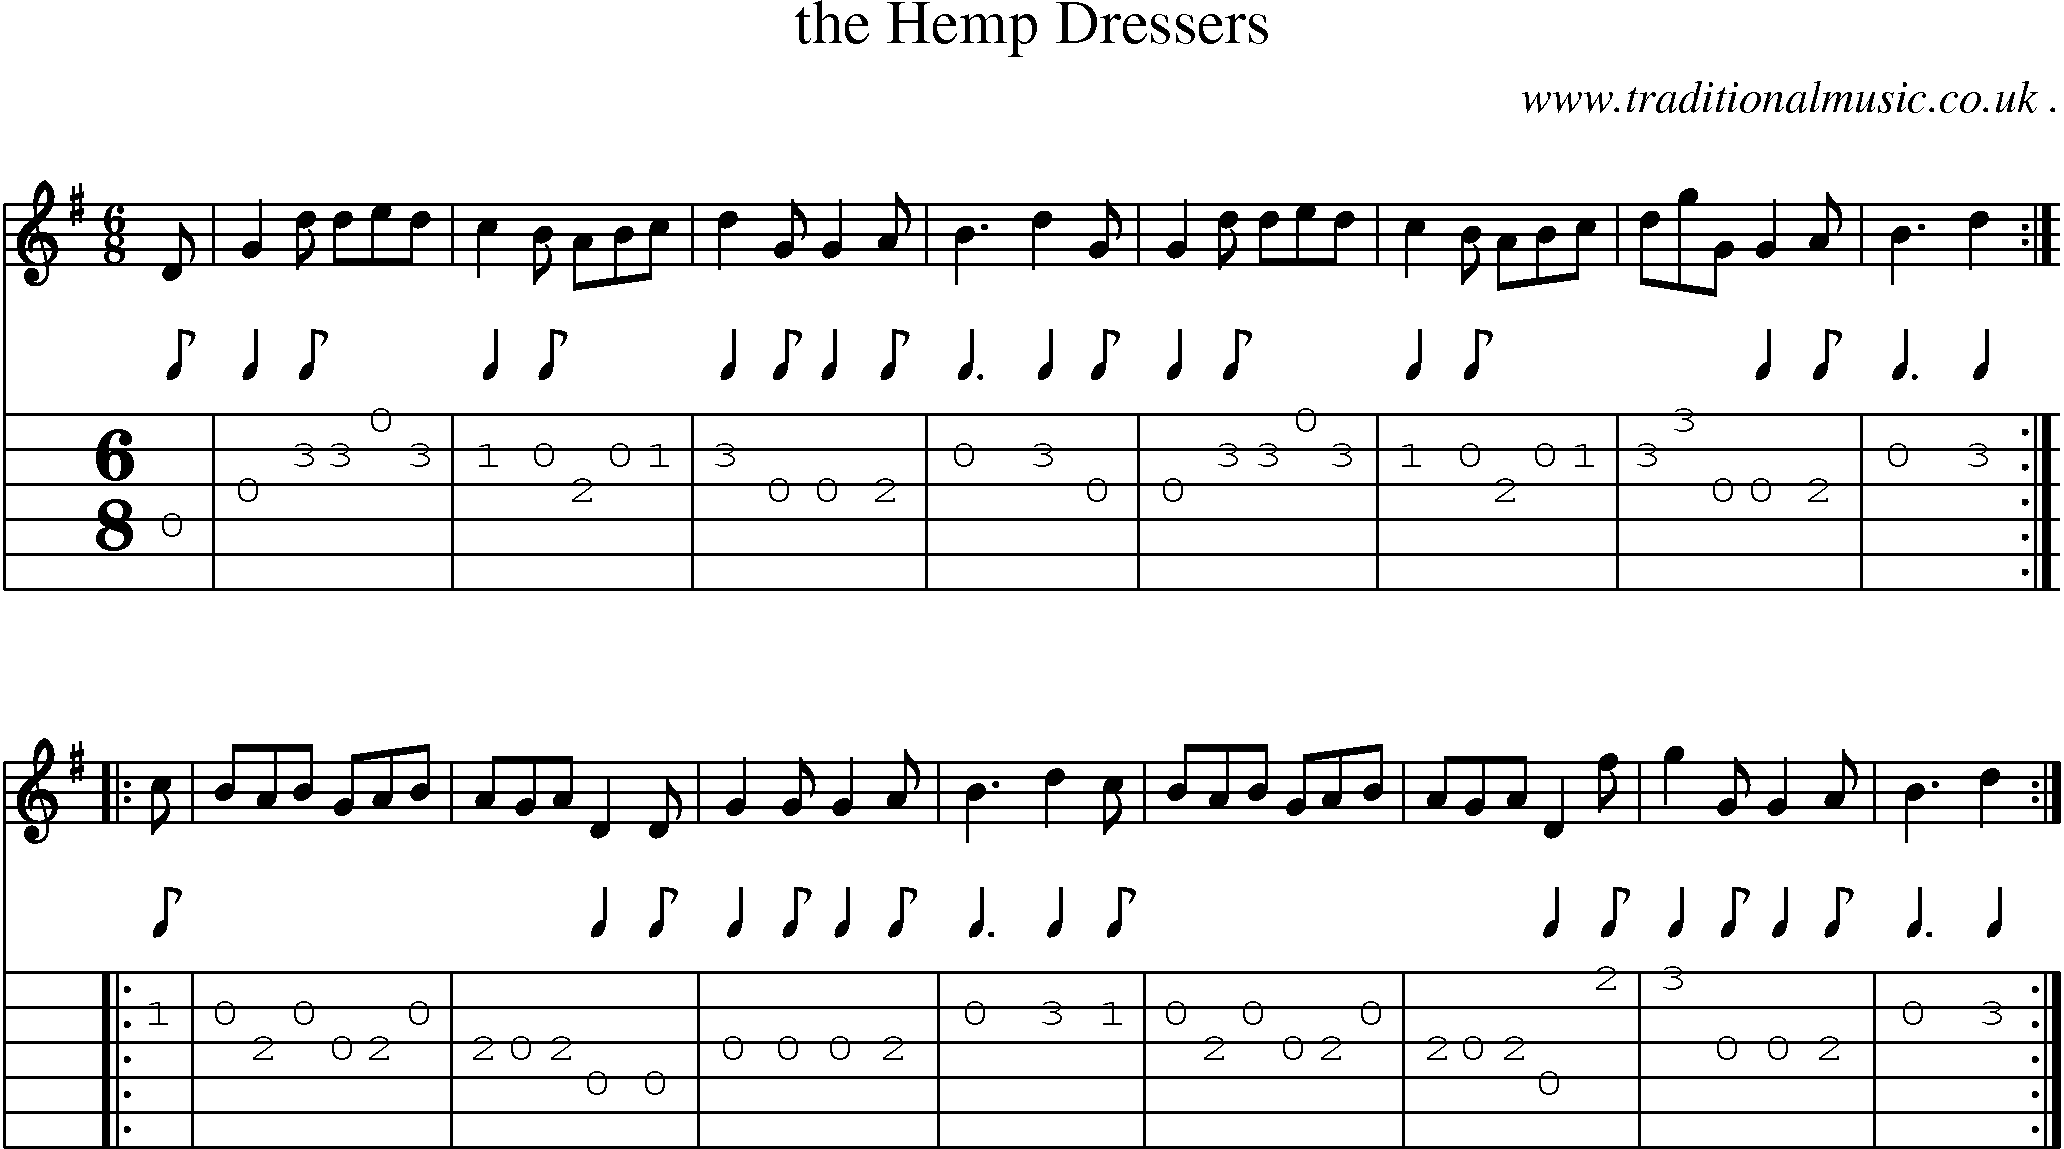 Sheet-Music and Guitar Tabs for The Hemp Dressers